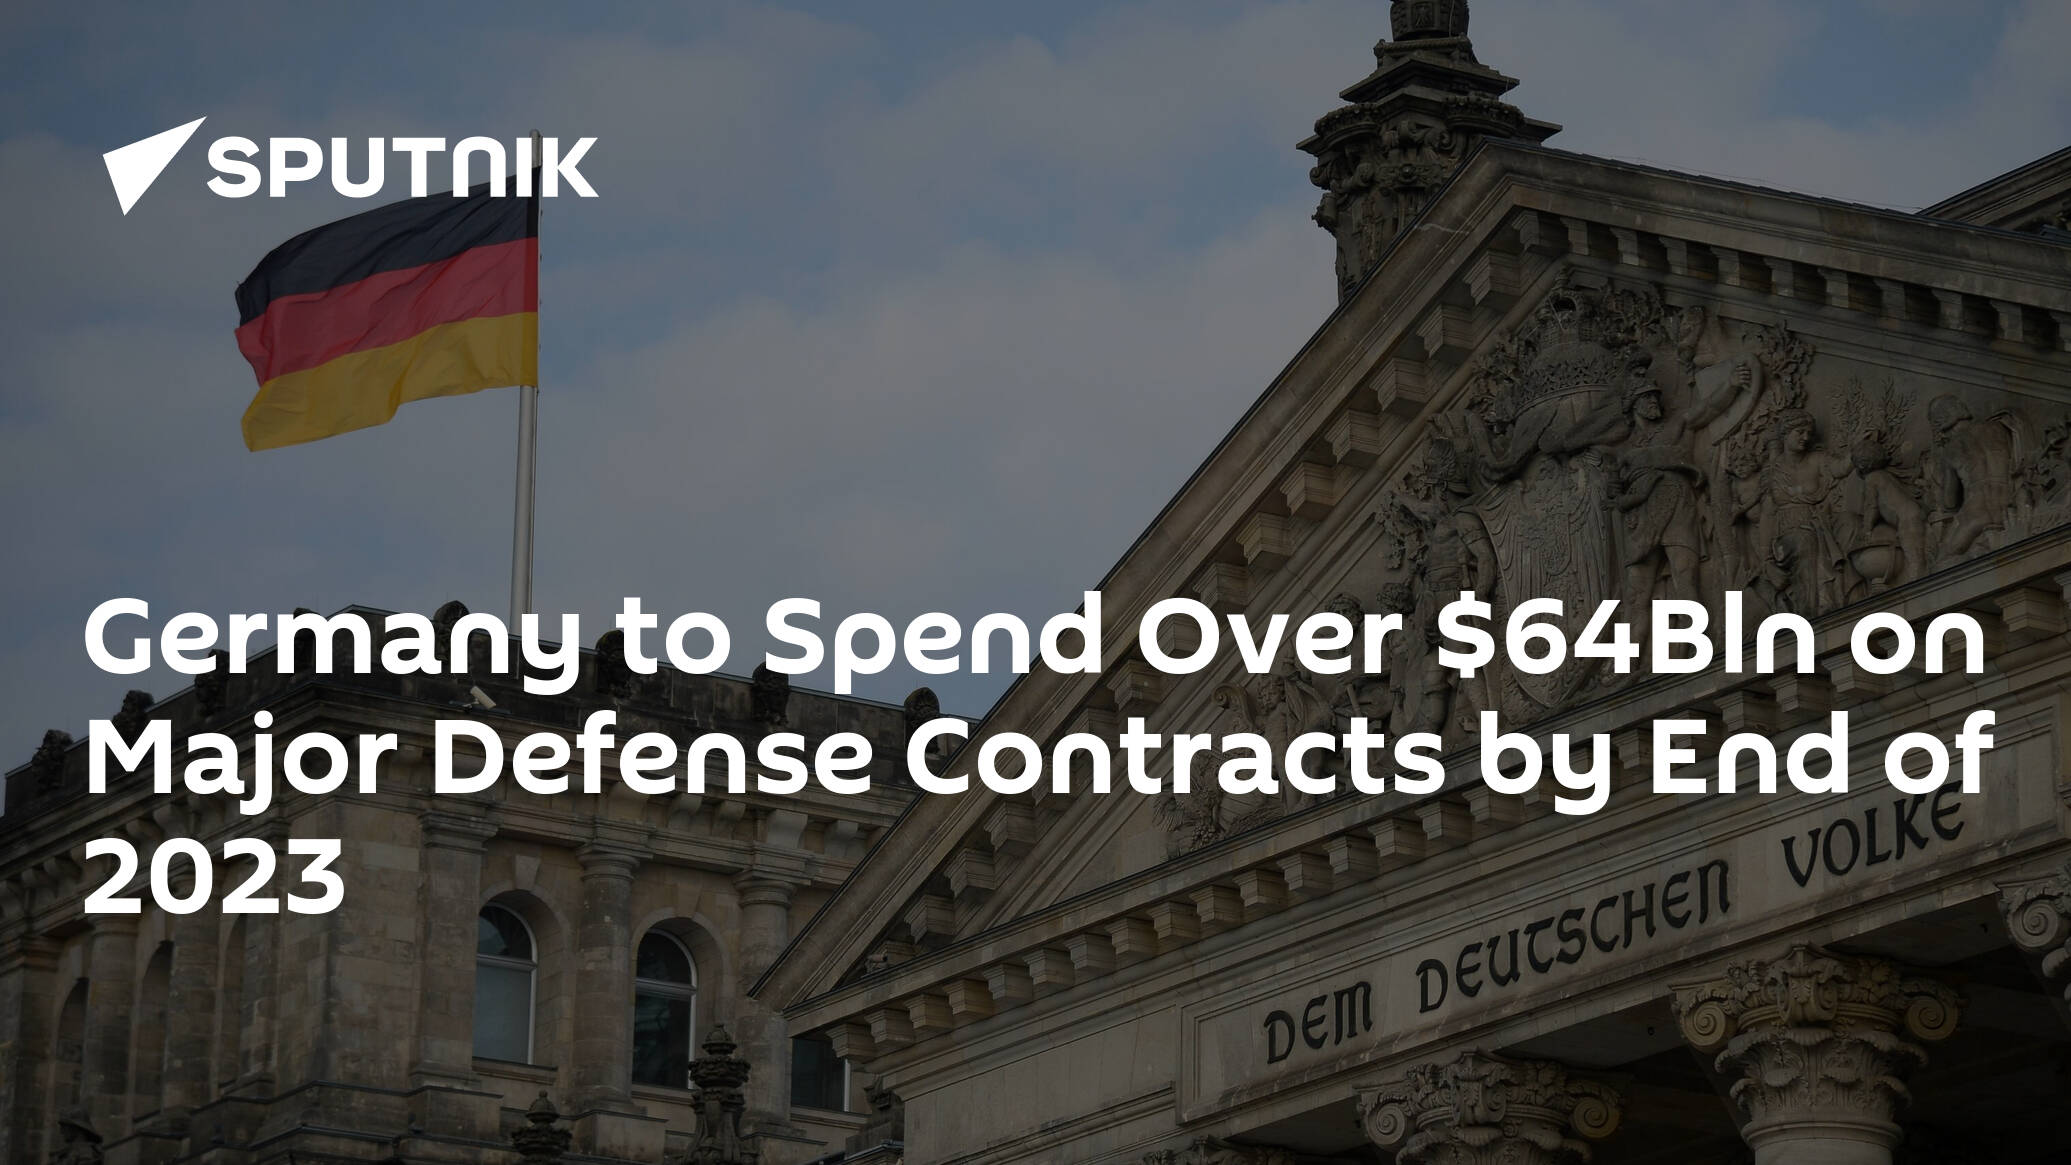 Germany to Spend Over Bln on Major Defense Contracts by End of 2023